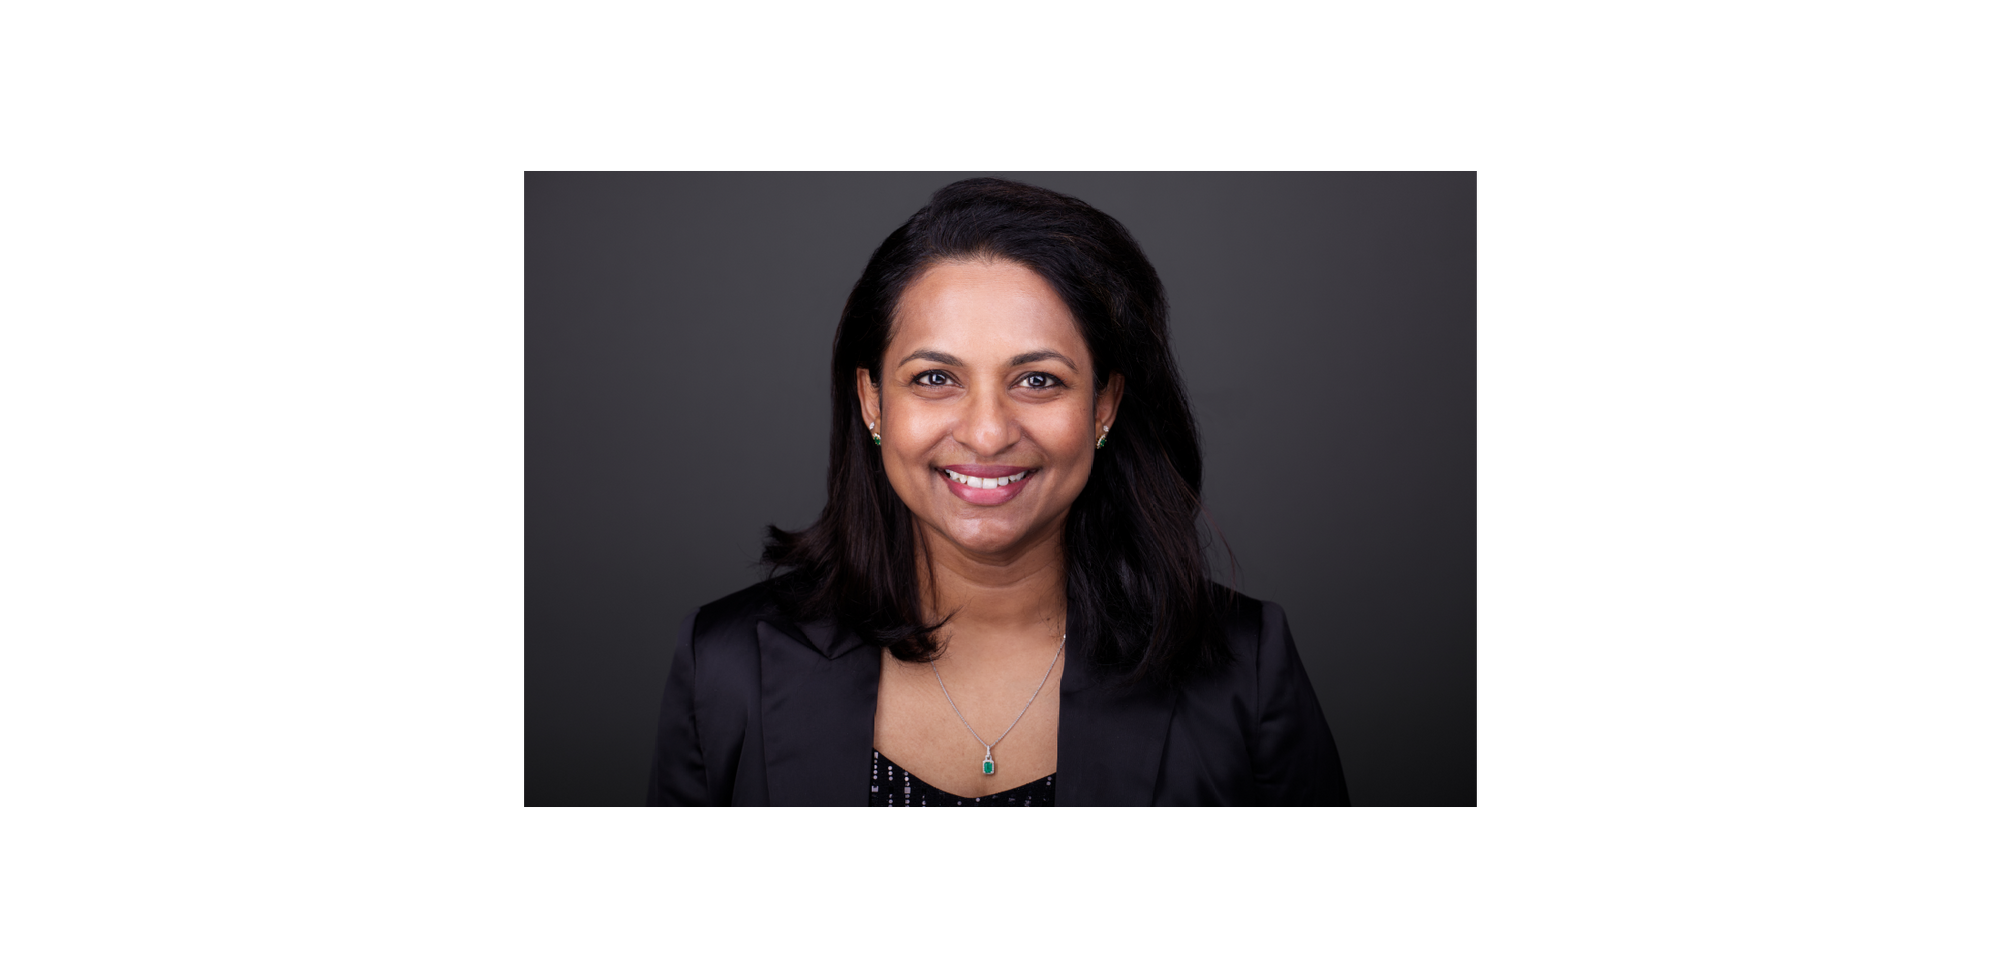 Lead With Influence - Dr. Aparna Arvind